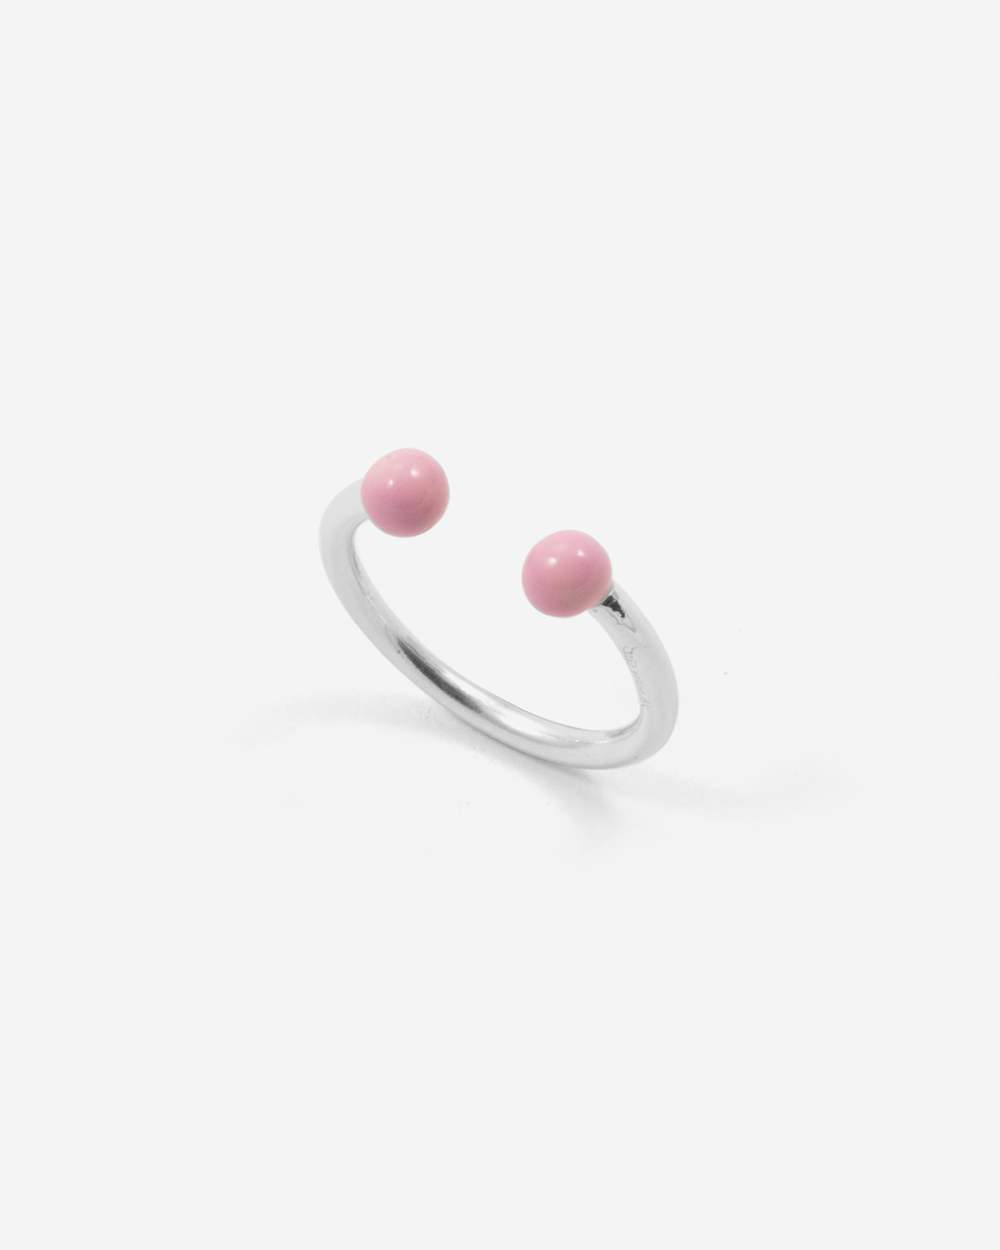 LARGE PIERCING RING WITH PINK SPHERES